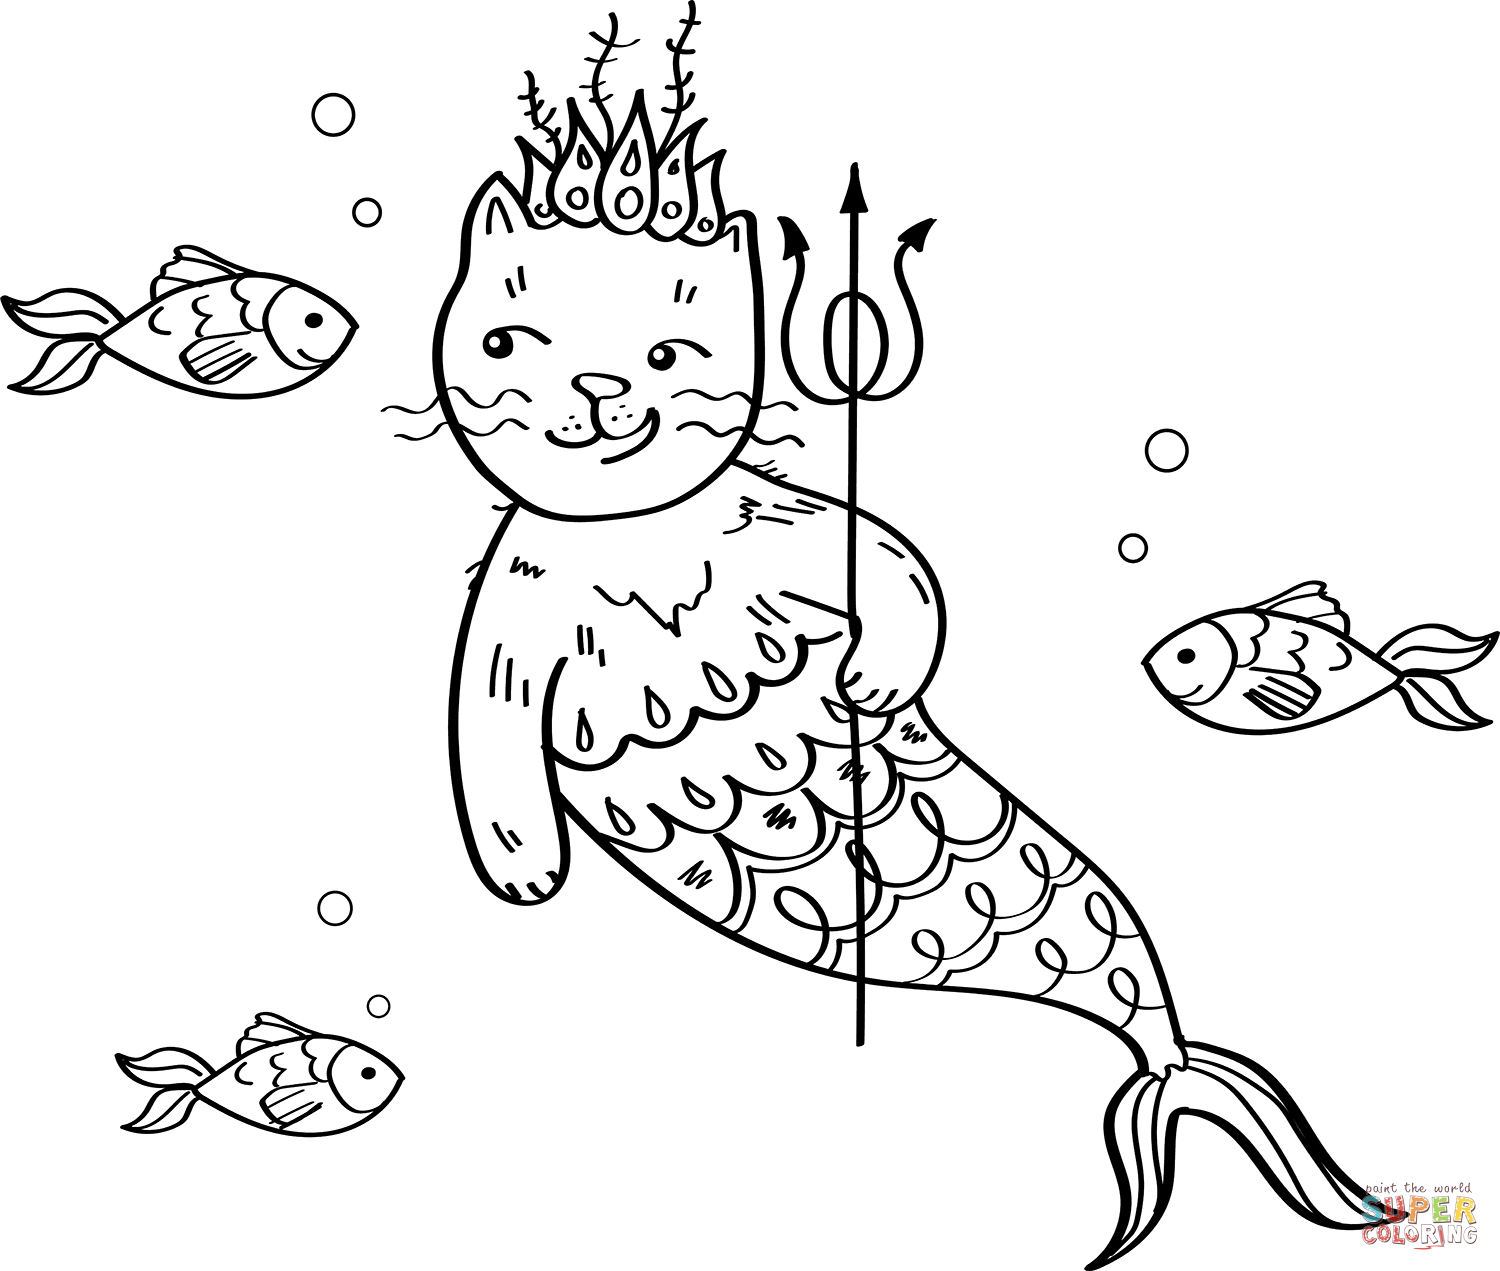 Mermaid Cat coloring page | Free Printable Coloring Pages